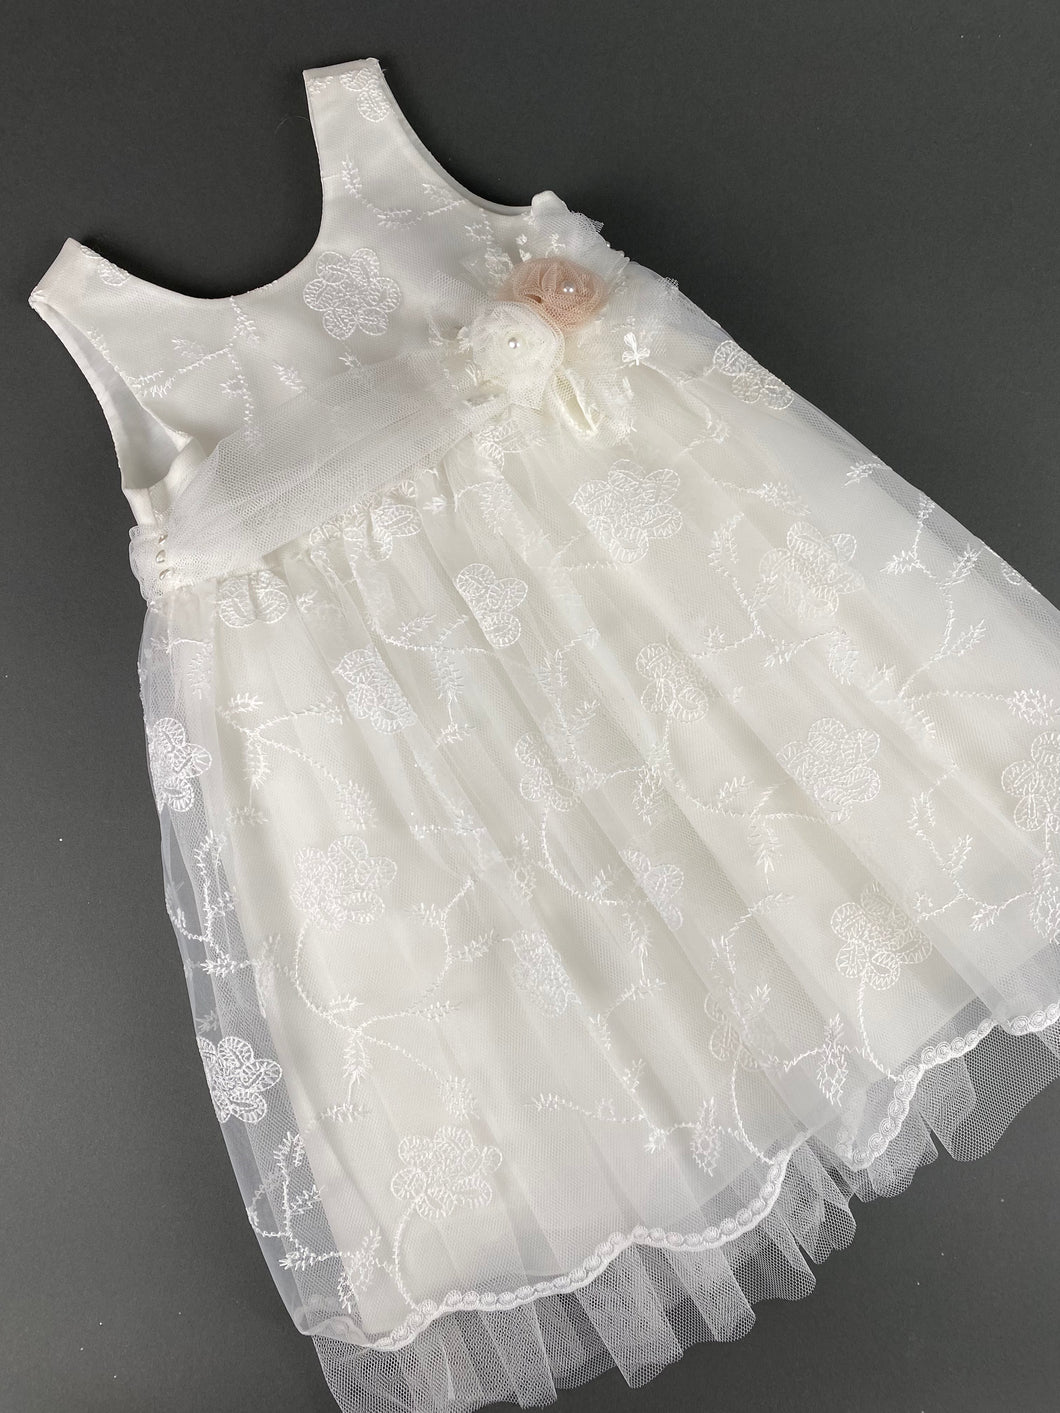 Dress 69 Girls Baptismal Christening Embroidered French Lace, matching Bolero and Hat. Made in Greece exclusively for Rosies Collections